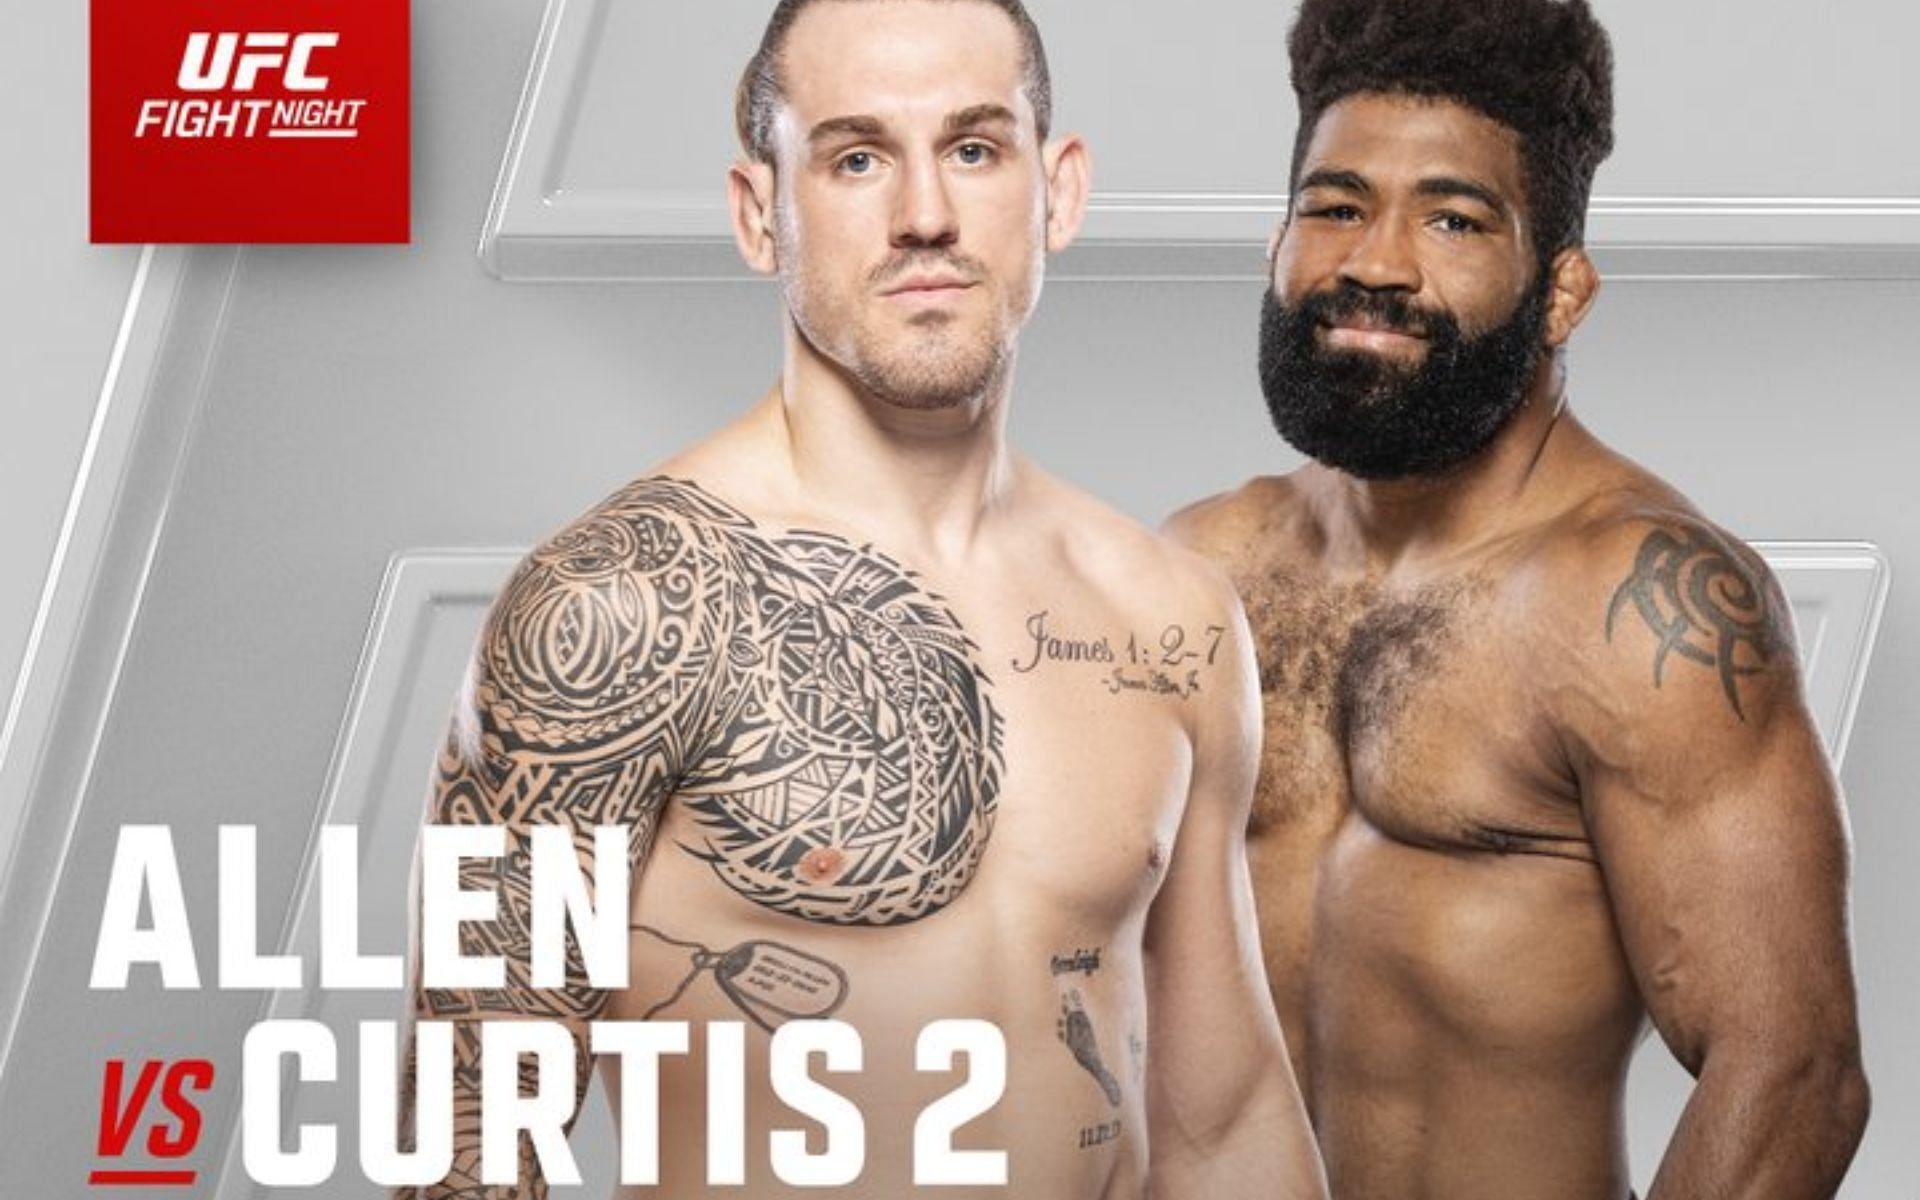 Brendan Allen takes on Chris Curtis in a rematch in this weekend